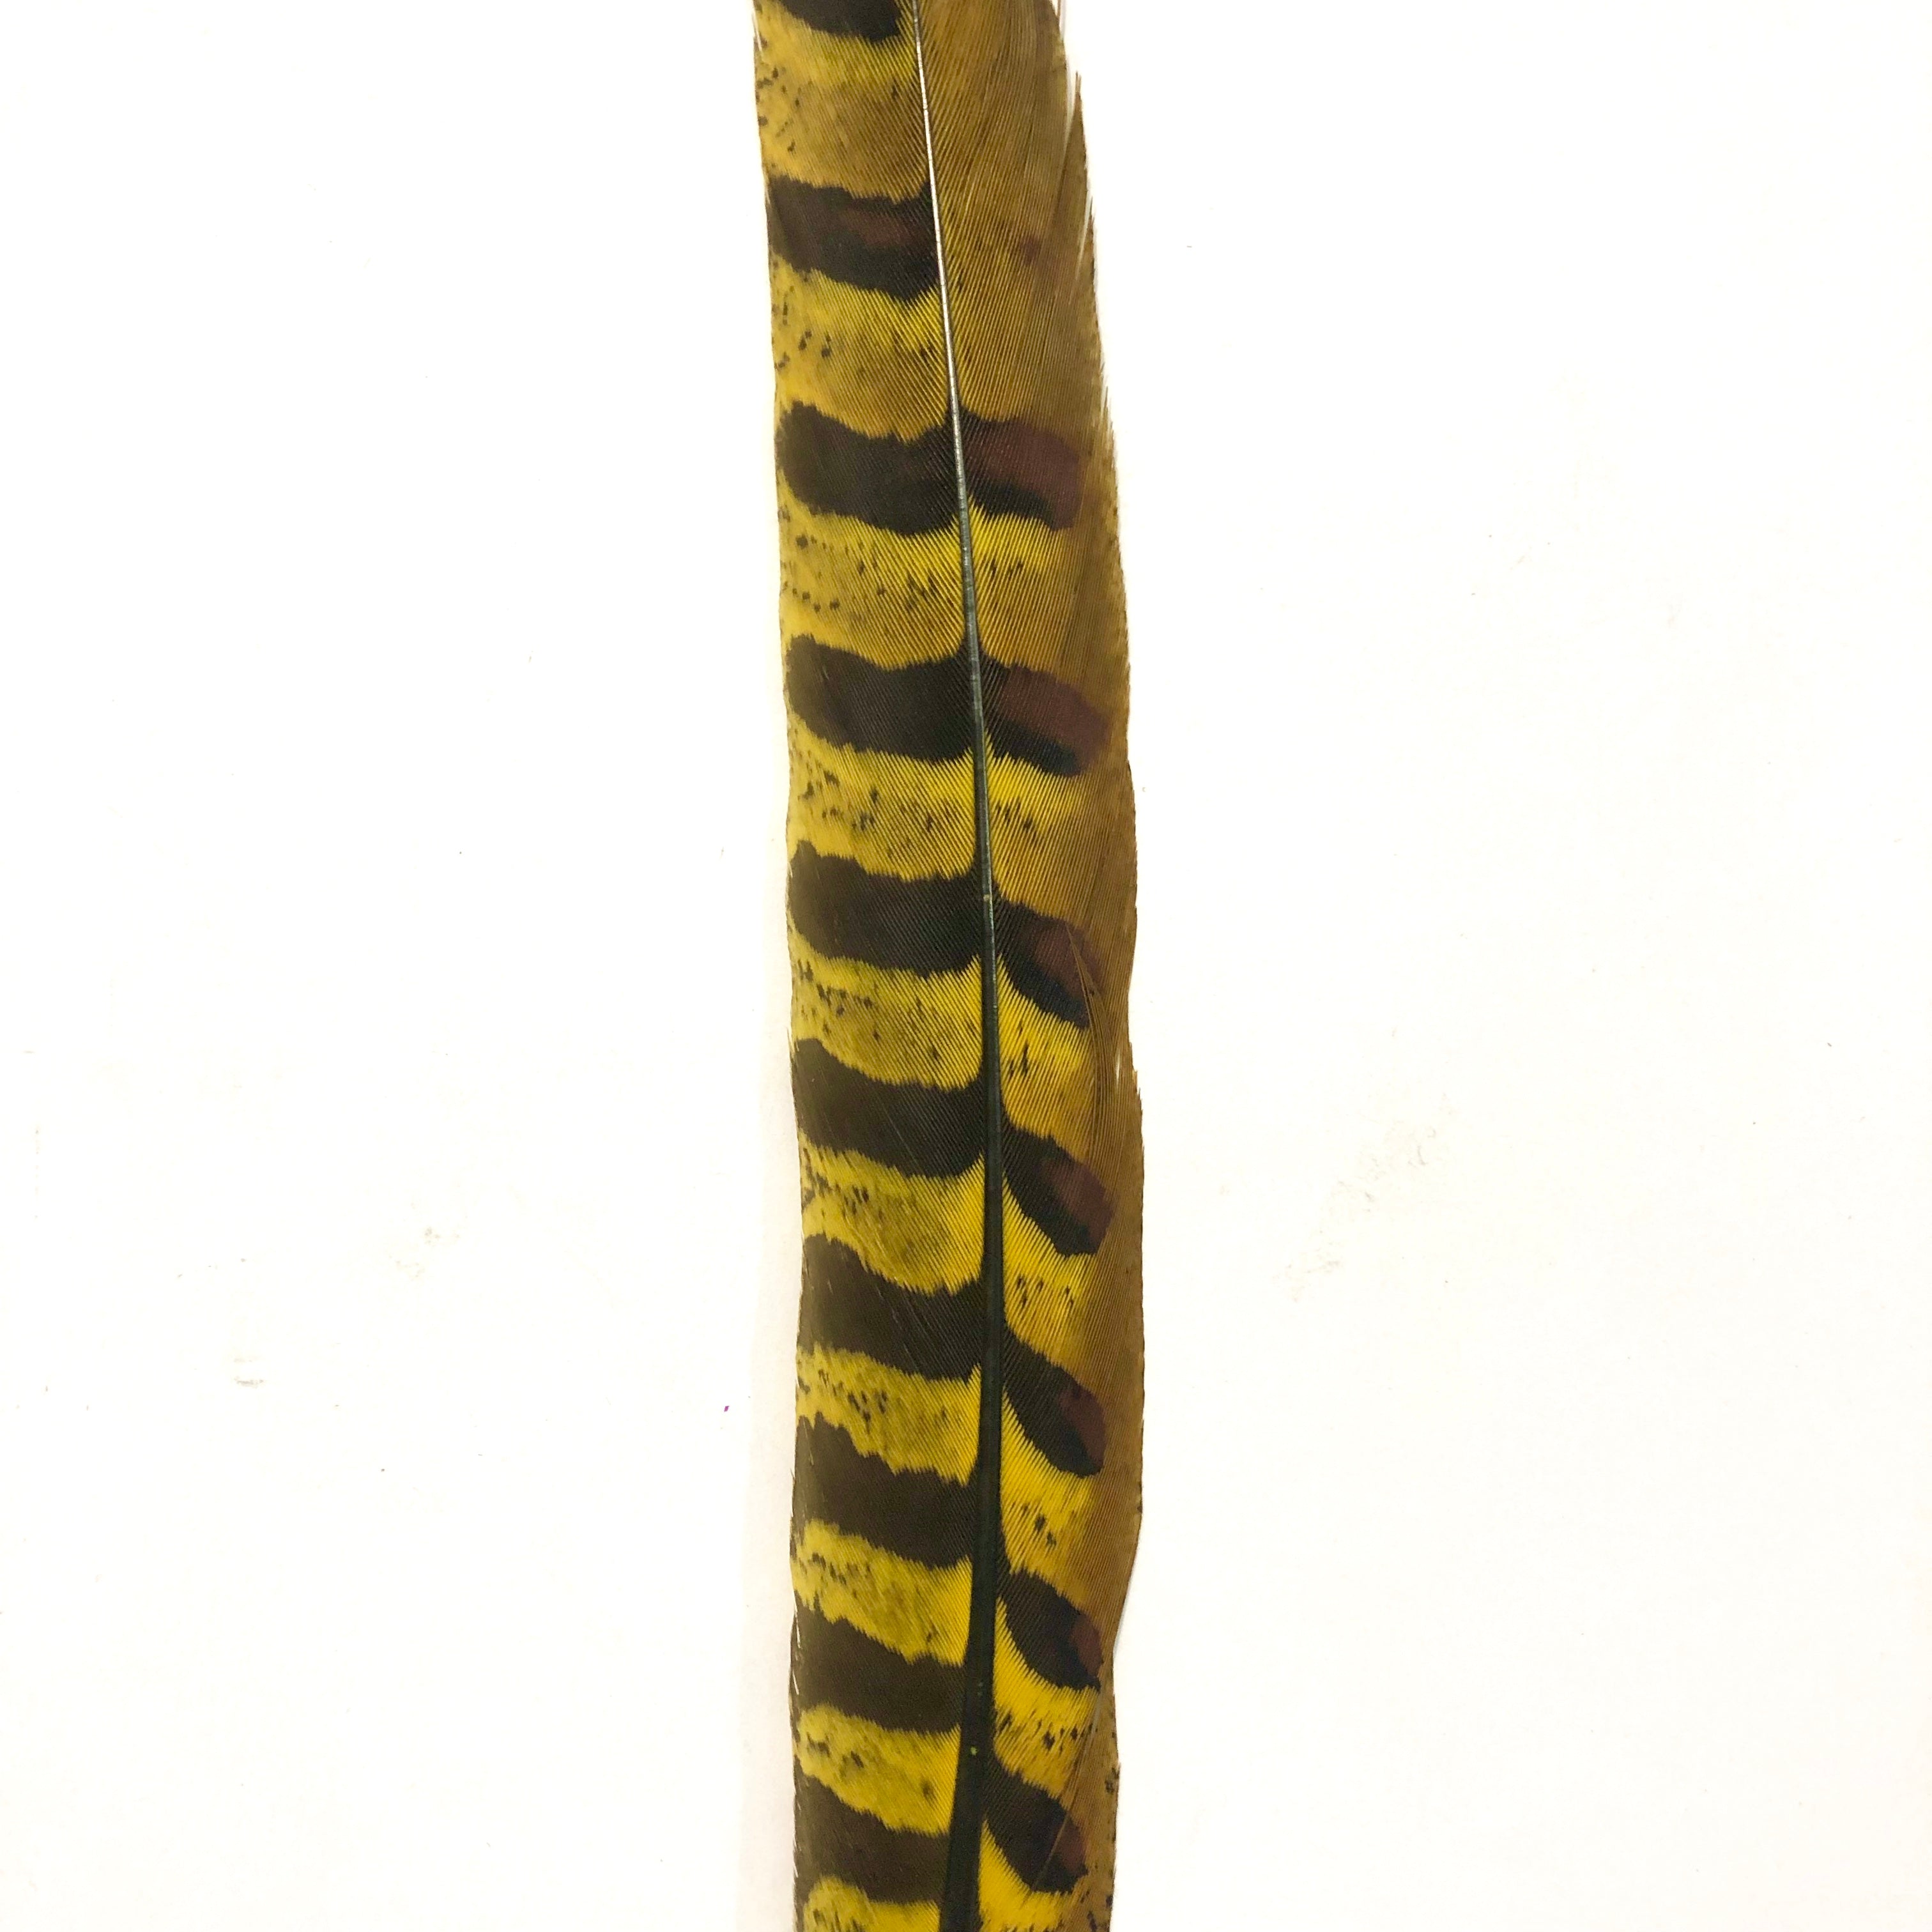 12" to 14" Reeves Pheasant Tail Feather - Yellow ((SECONDS))